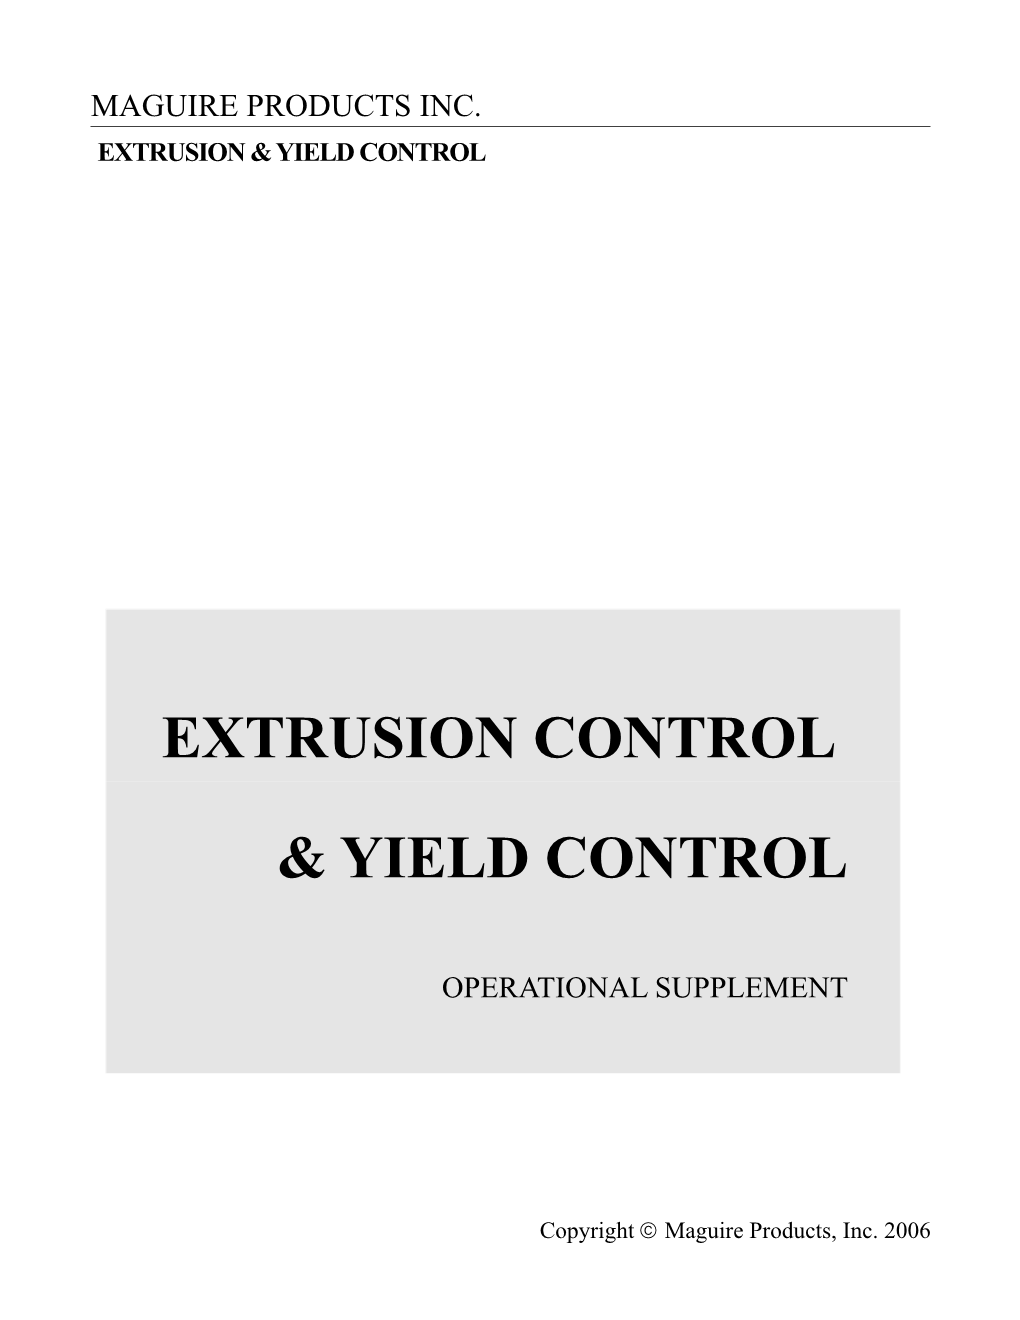 Extrusion & Yield Control